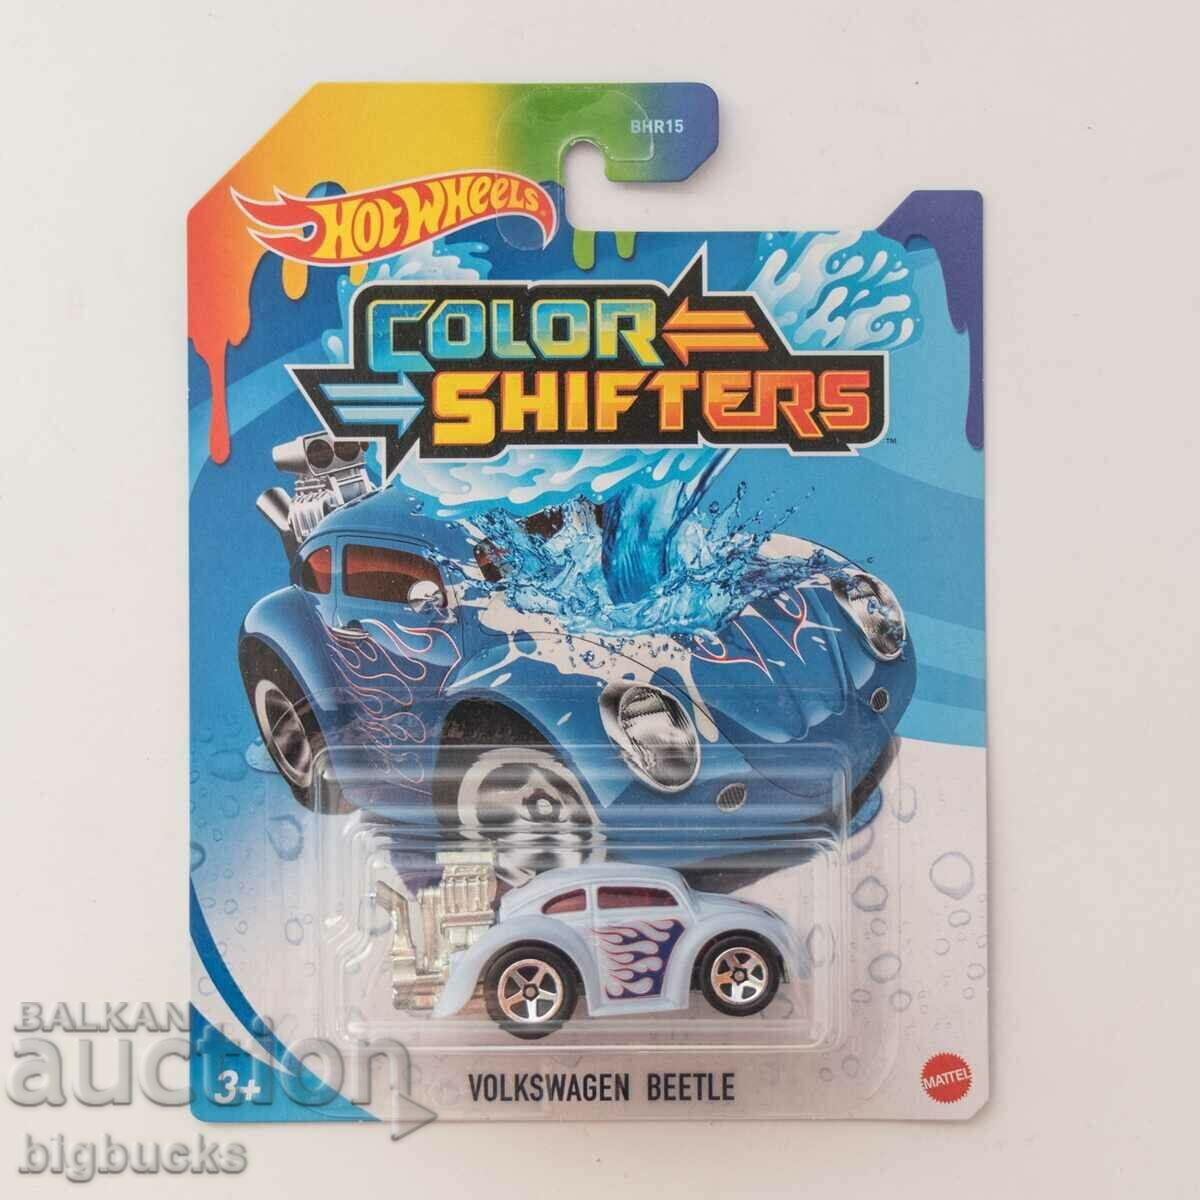 Hot Wheels Color Shifters VW Beetle Tooned car 1:64